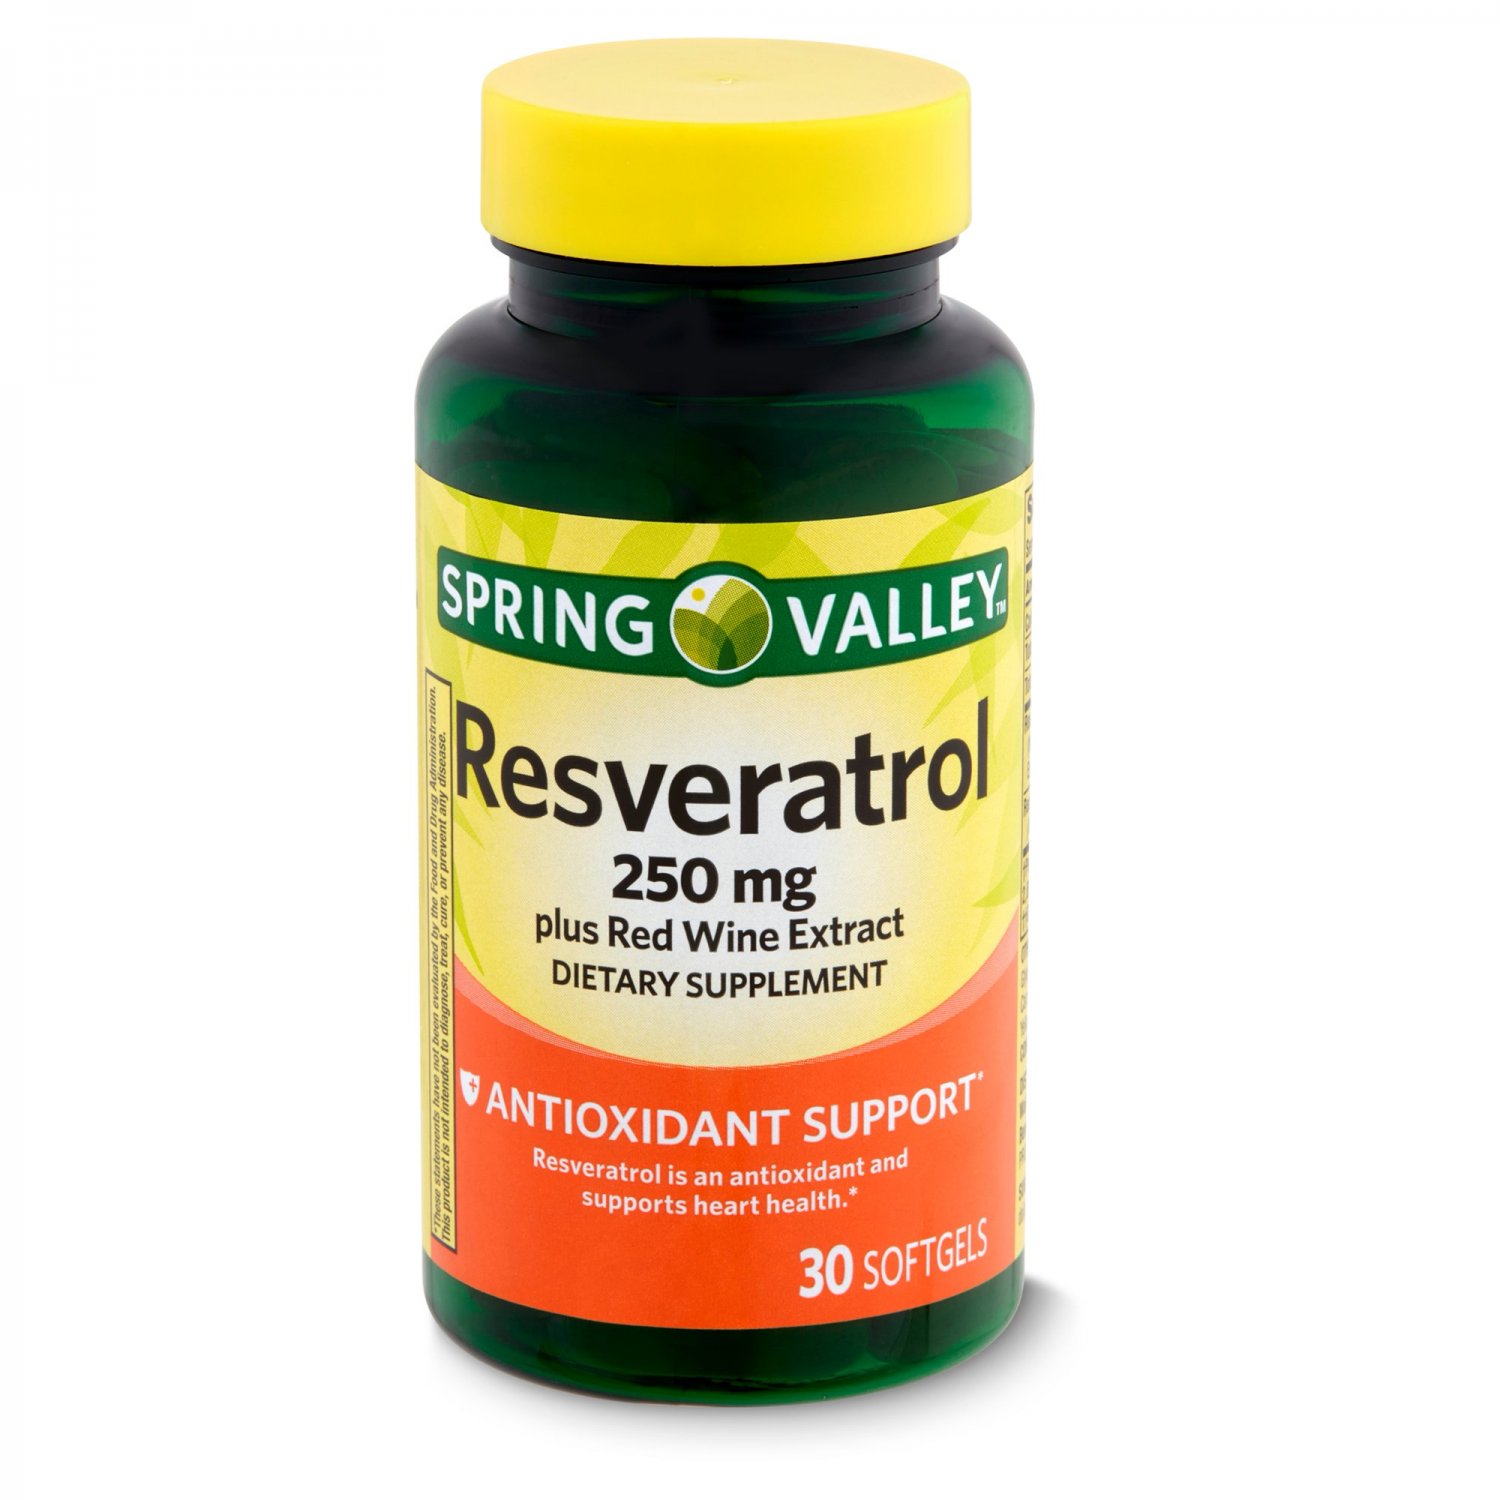 Spring Valley Resveratrol Plus Red Wine Extract 250 mg, 30 Softgels